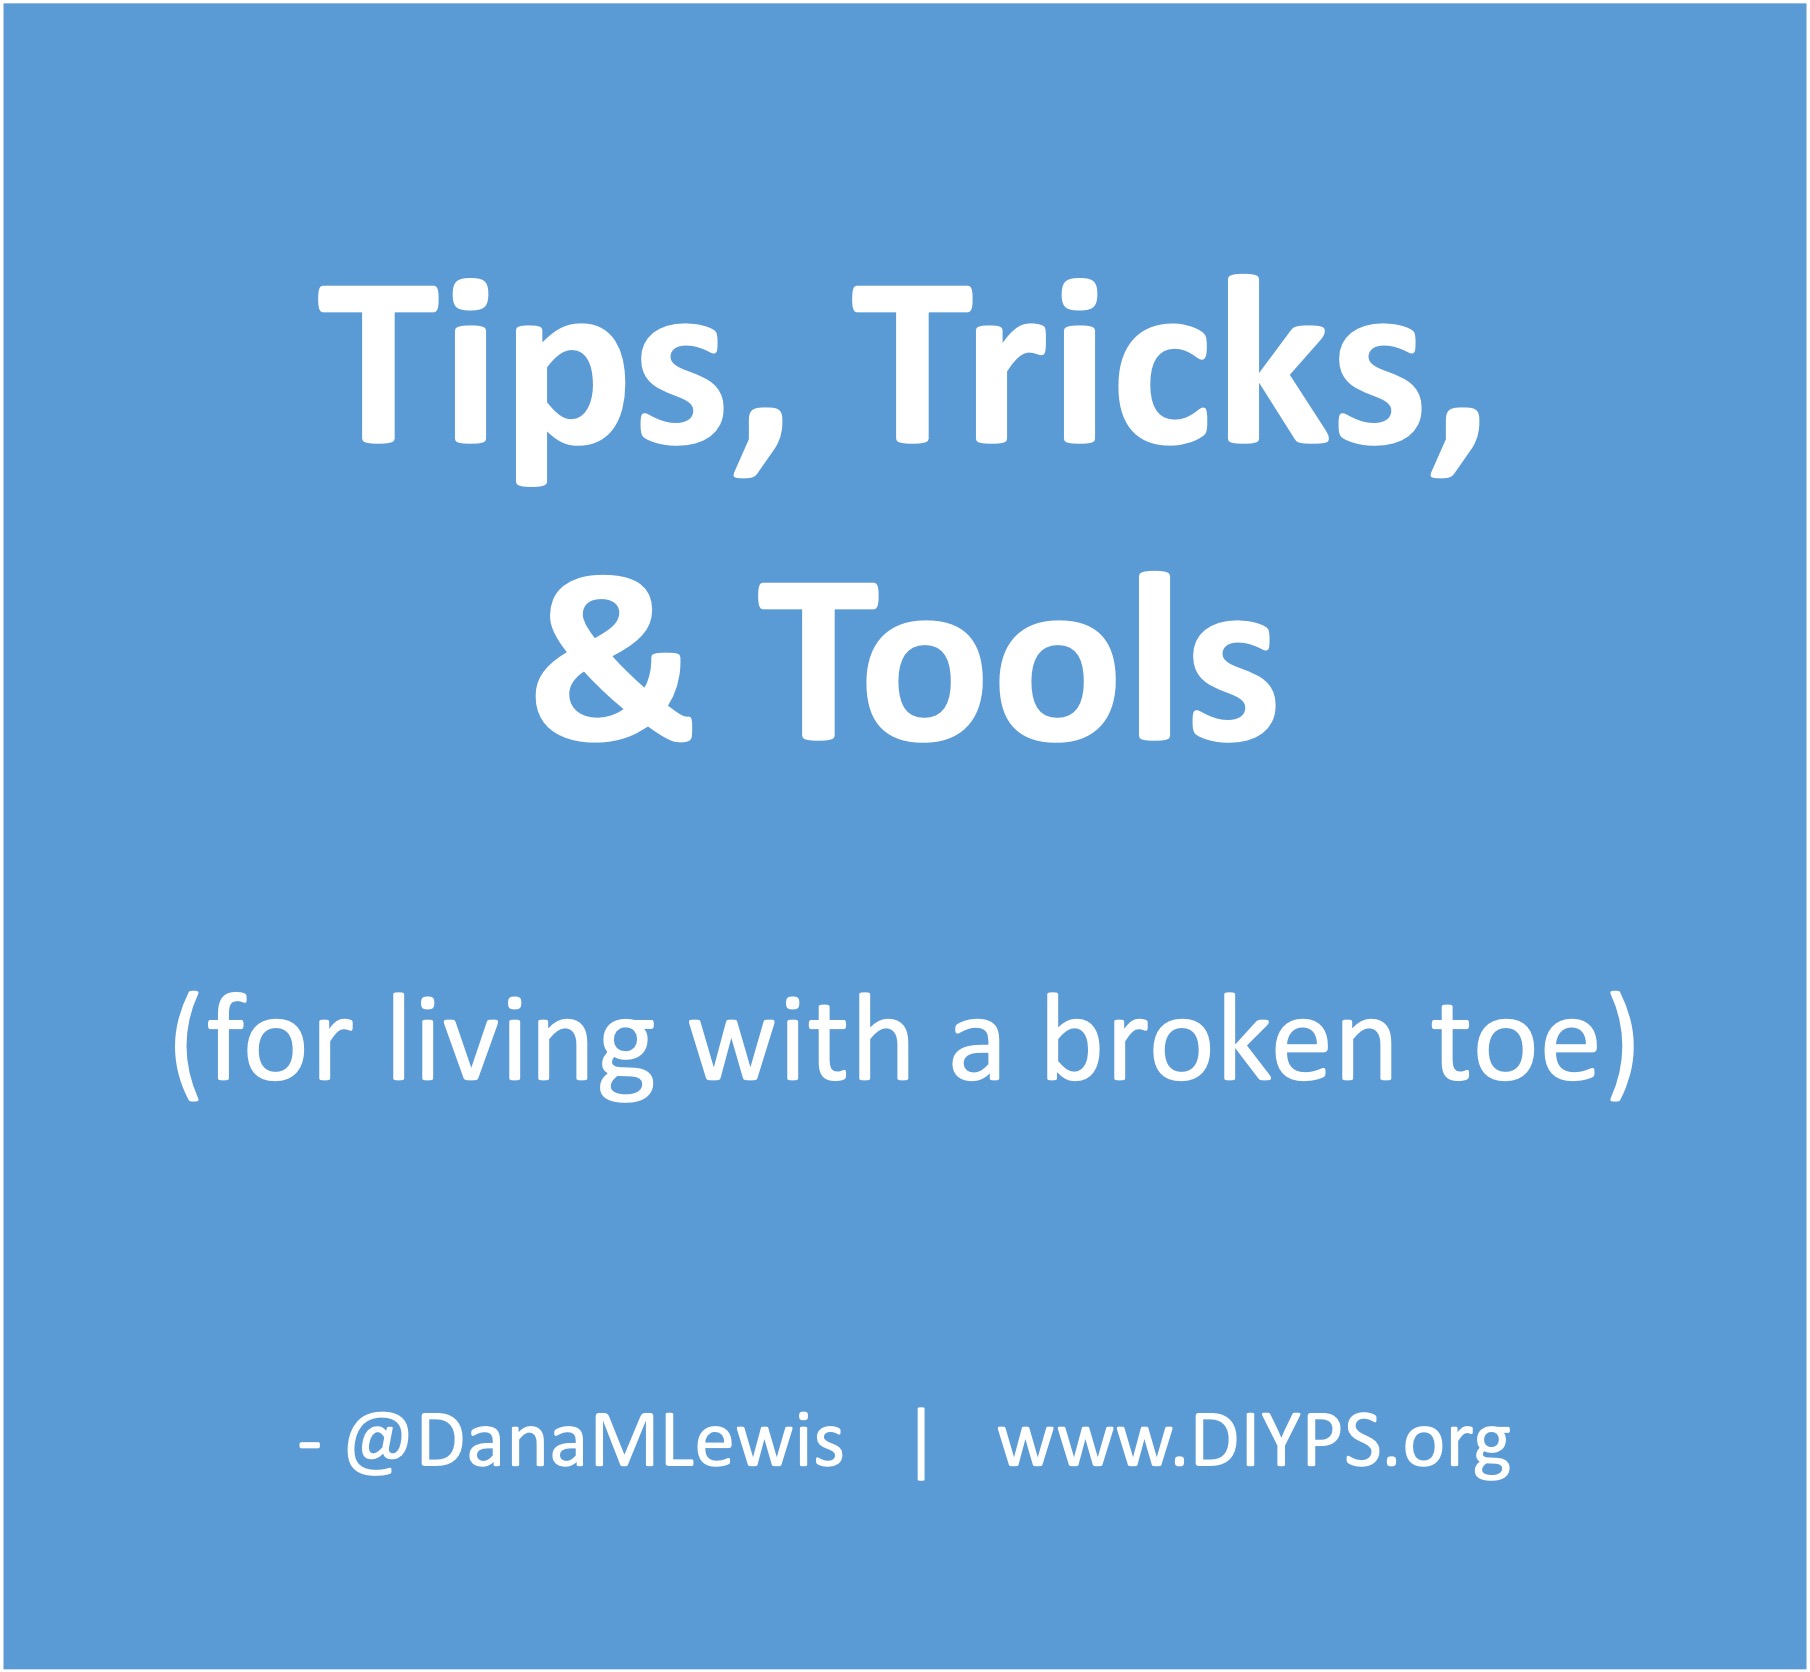 Tips, Tricks, & Tools for living with a broken toe, written by Dana M. Lewis